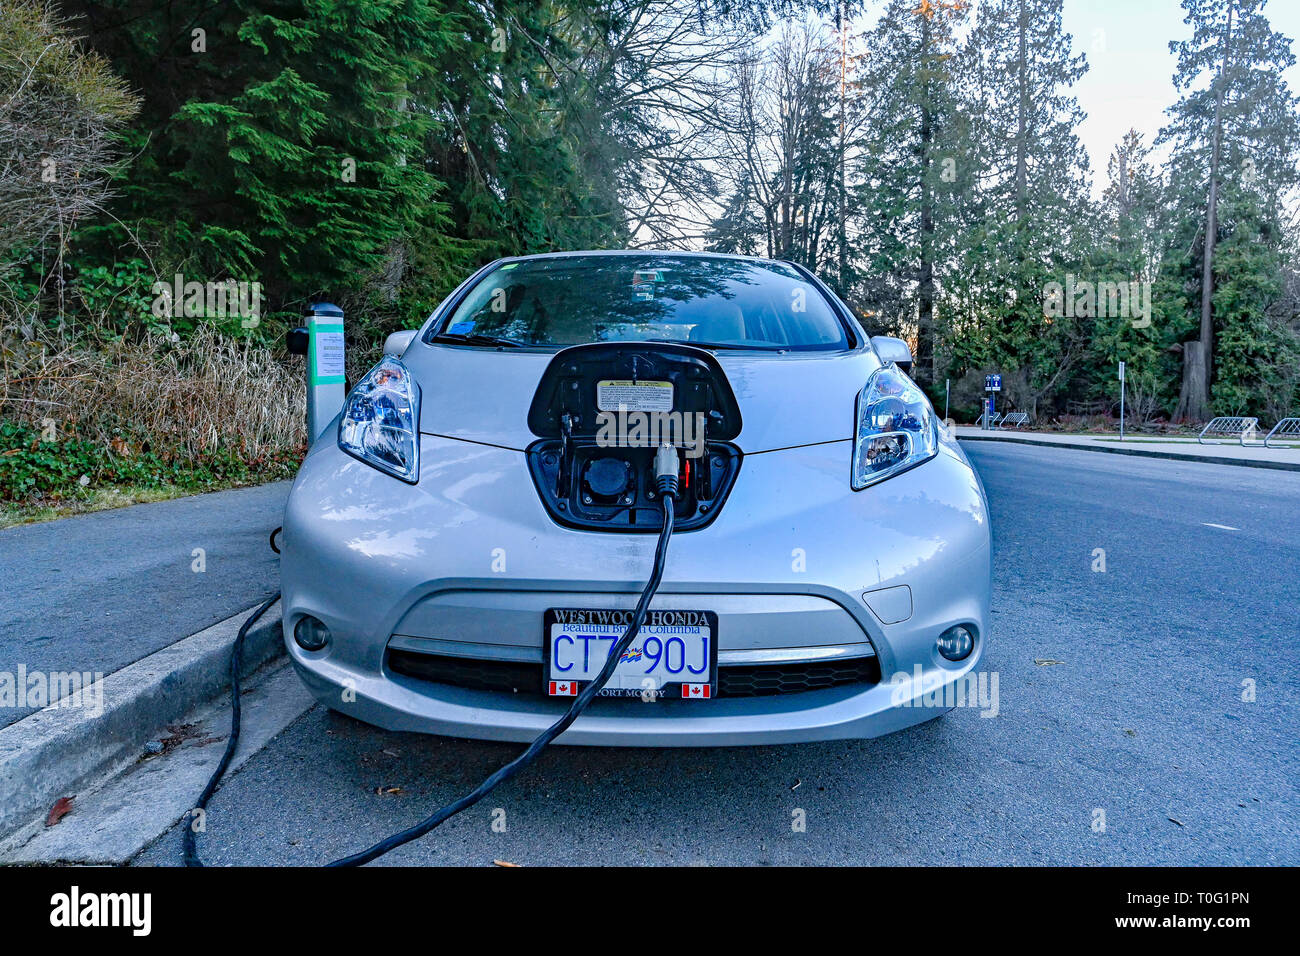 Nissan Leaf, Electric car at charging station, Stanley Park, Vancouver, British Columbia, Canada Stock Photo